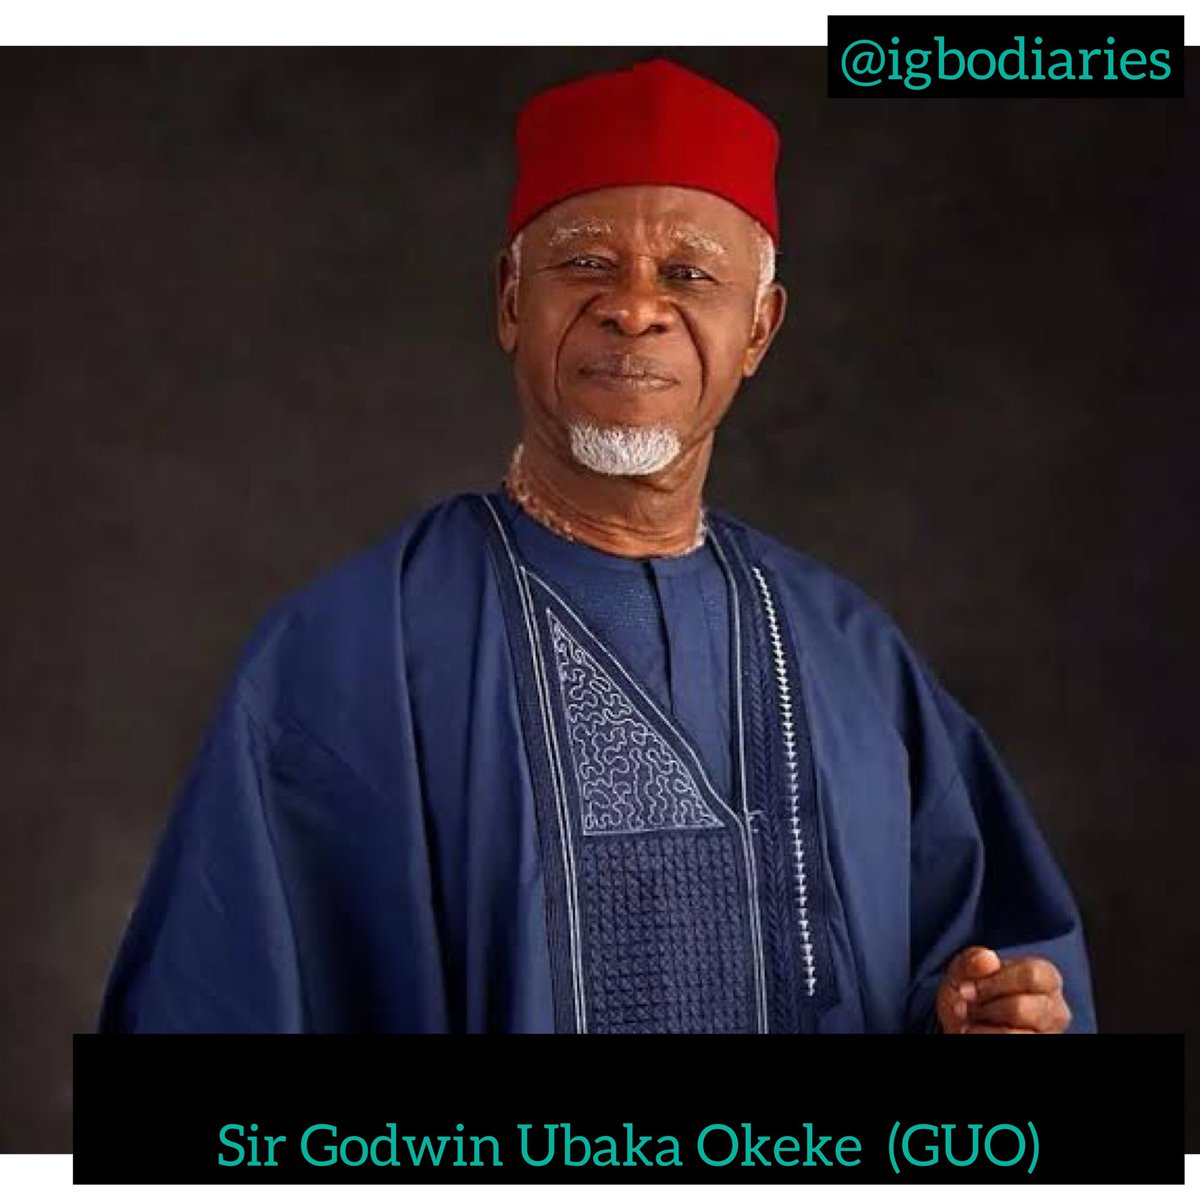 Sir Godwin Ubaka Okeke, who is popularly called GUO, is a popular  transport guru. He is the owner of popular GUO Transport Company. 

Born on the 6th of June in the year 1949 in Onitsha, Anambra State Nigeria. But he is an indigene of Adazi Ani in Anaocha LGA of Anambra.